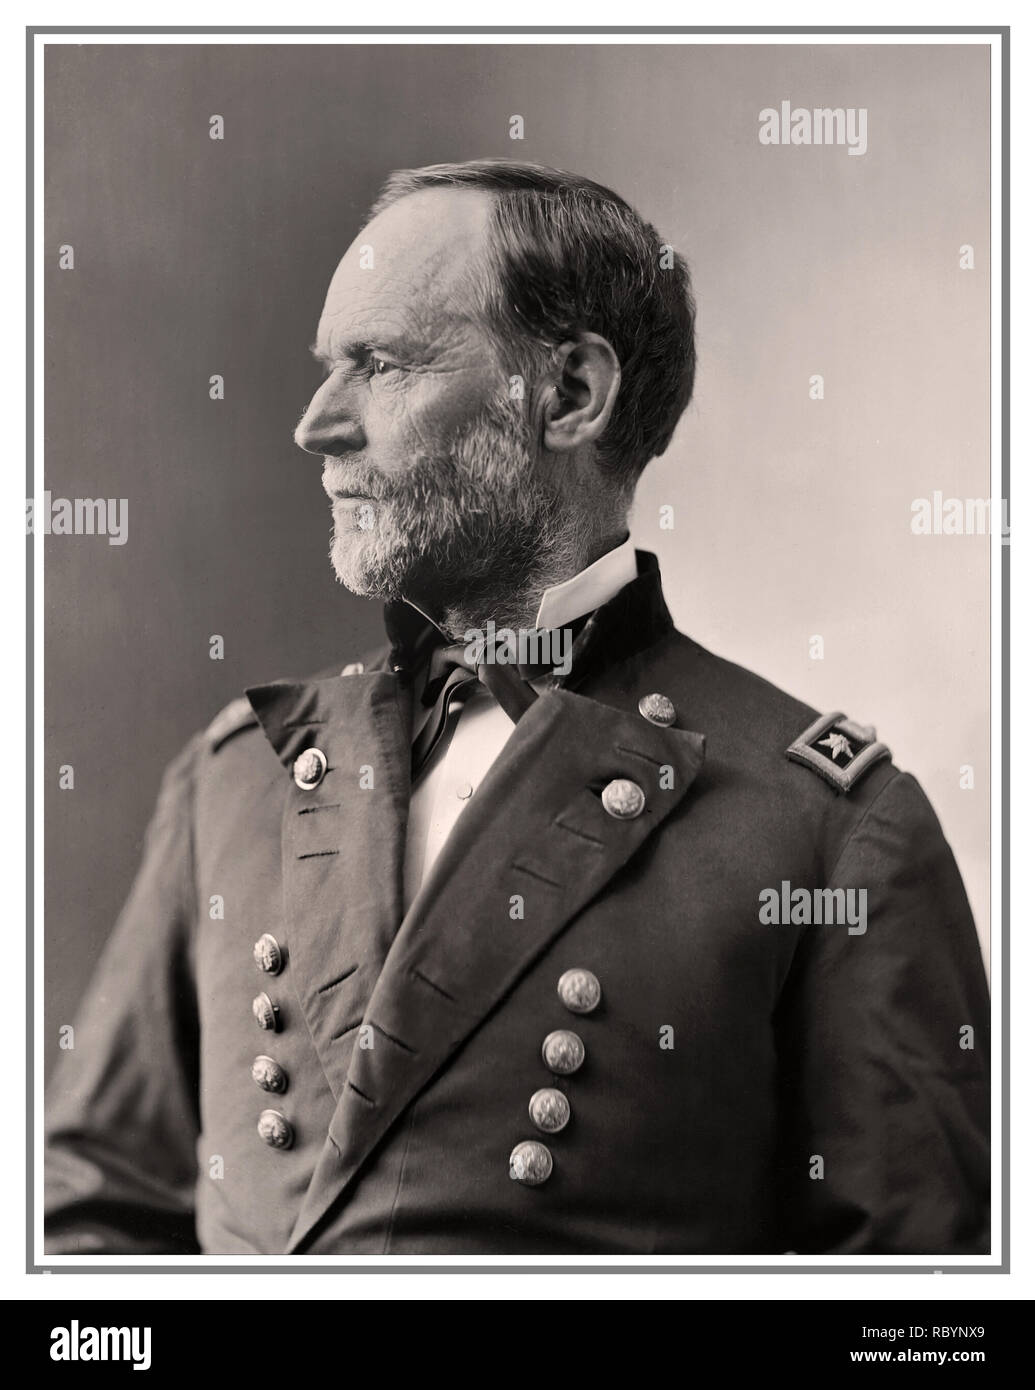 GENERAL SHERMAN UNION ARMY GENERAL Archive Portrait of General William Tecumseh Sherman,  Wm T. U.S.A. (between 1865 and 1880) General in the Union Army where he fought with distinction in the civil war William Tecumseh Sherman (February 8, 1820 – February 14, 1891) was an American soldier, businessman, educator, and author. He served as a general in the Union Army during the American Civil War (1861–65), for which he received recognition for his outstanding command of military strategy as well as criticism for the harshness of the scorched earth policies he implemented in conducting total war Stock Photo